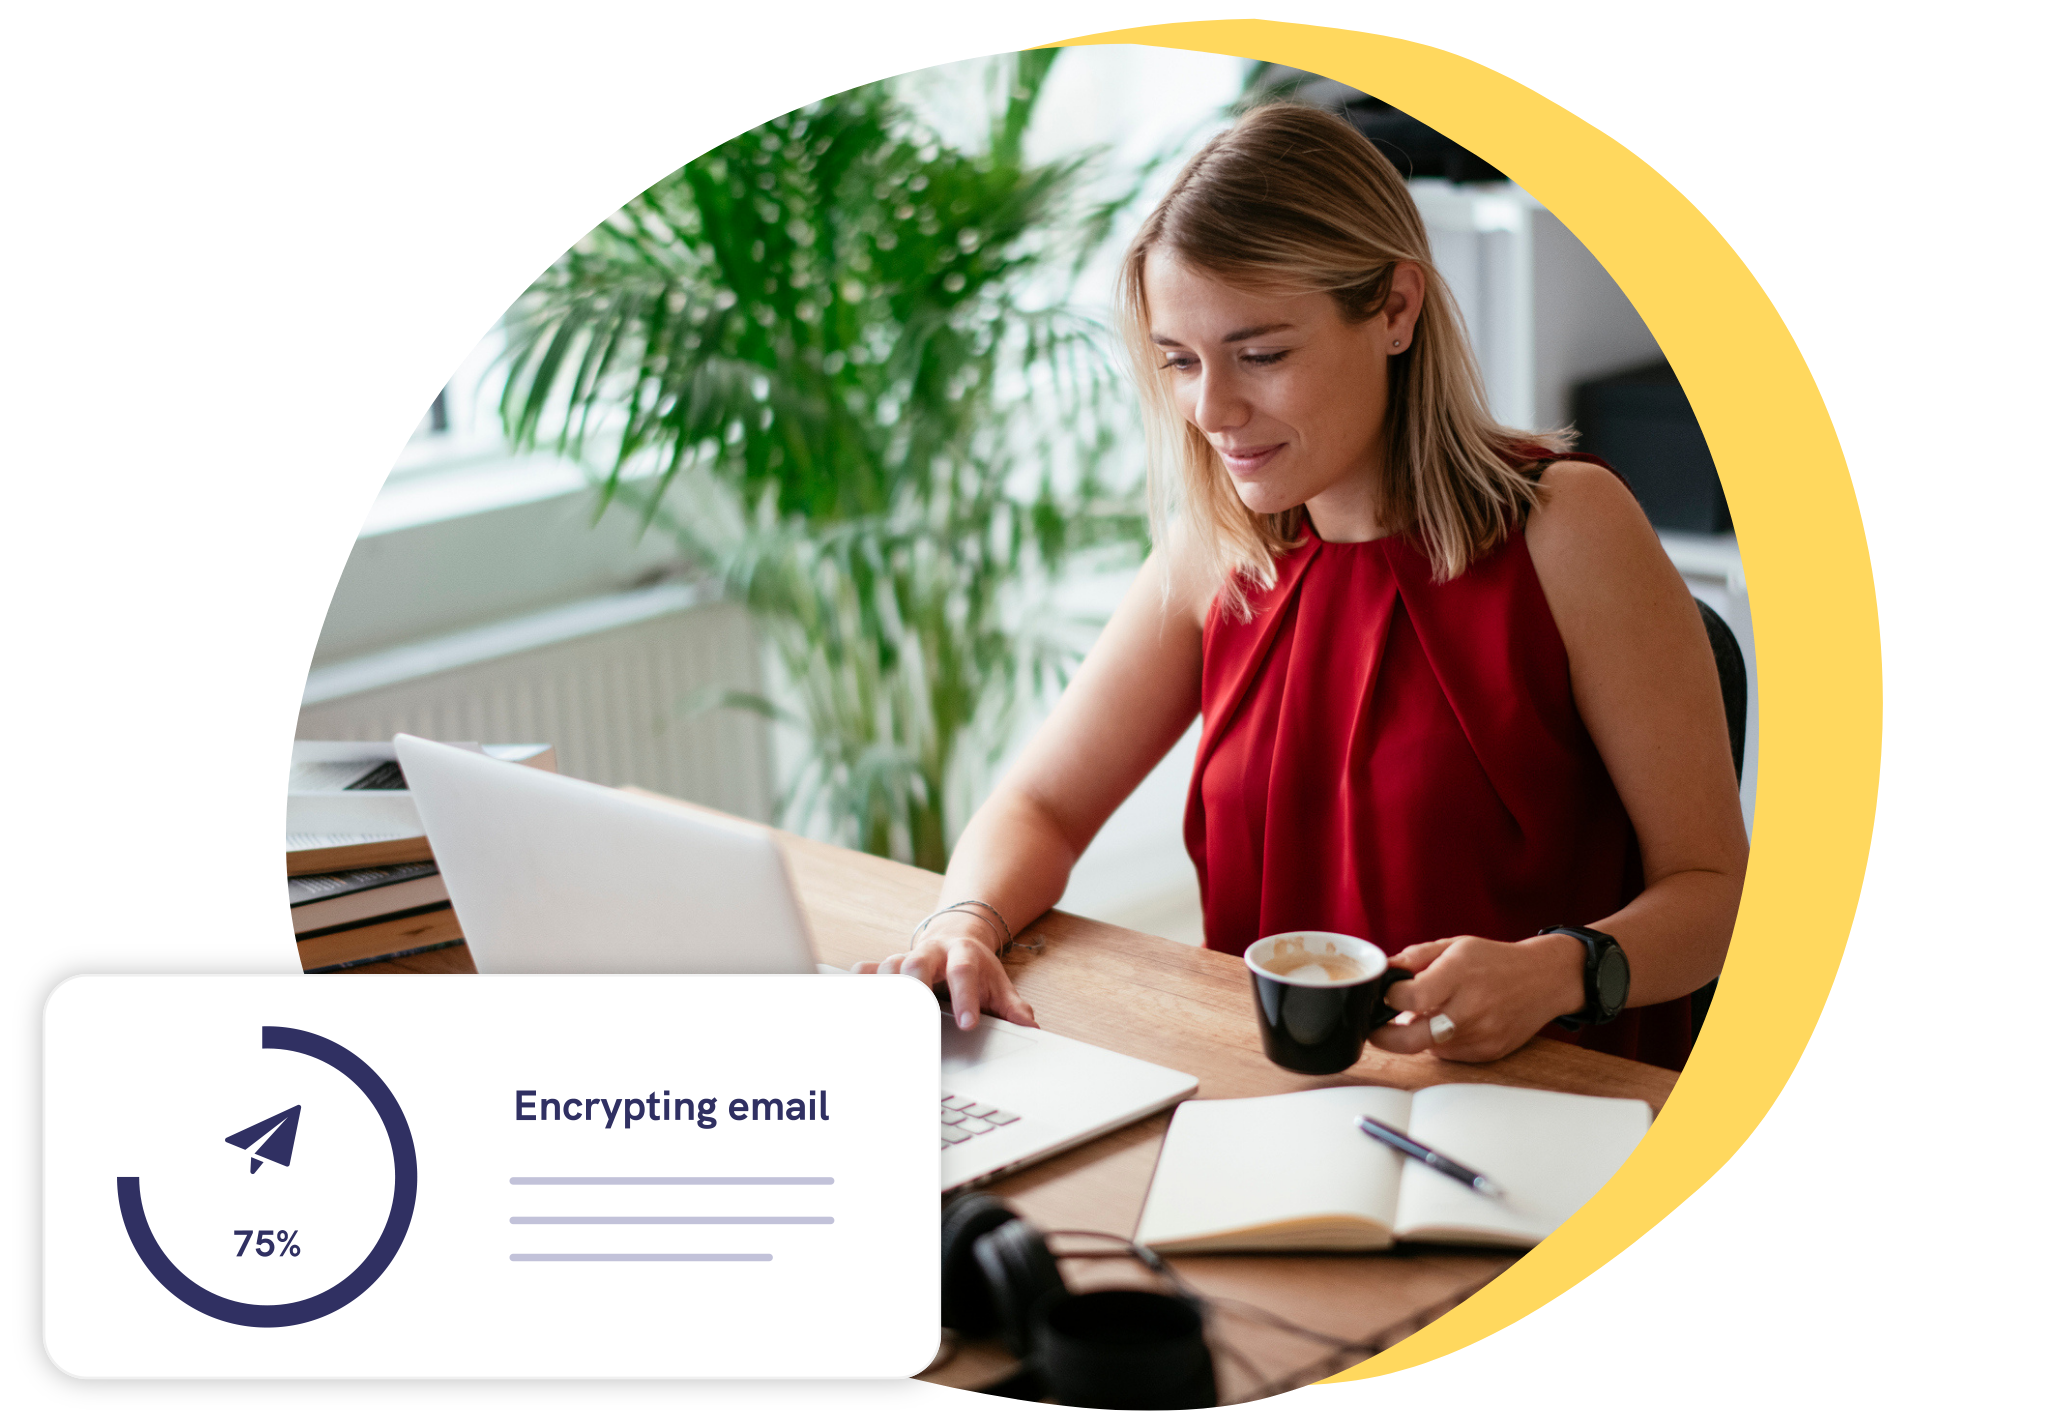 Woman-encrypting-emails-to-clients